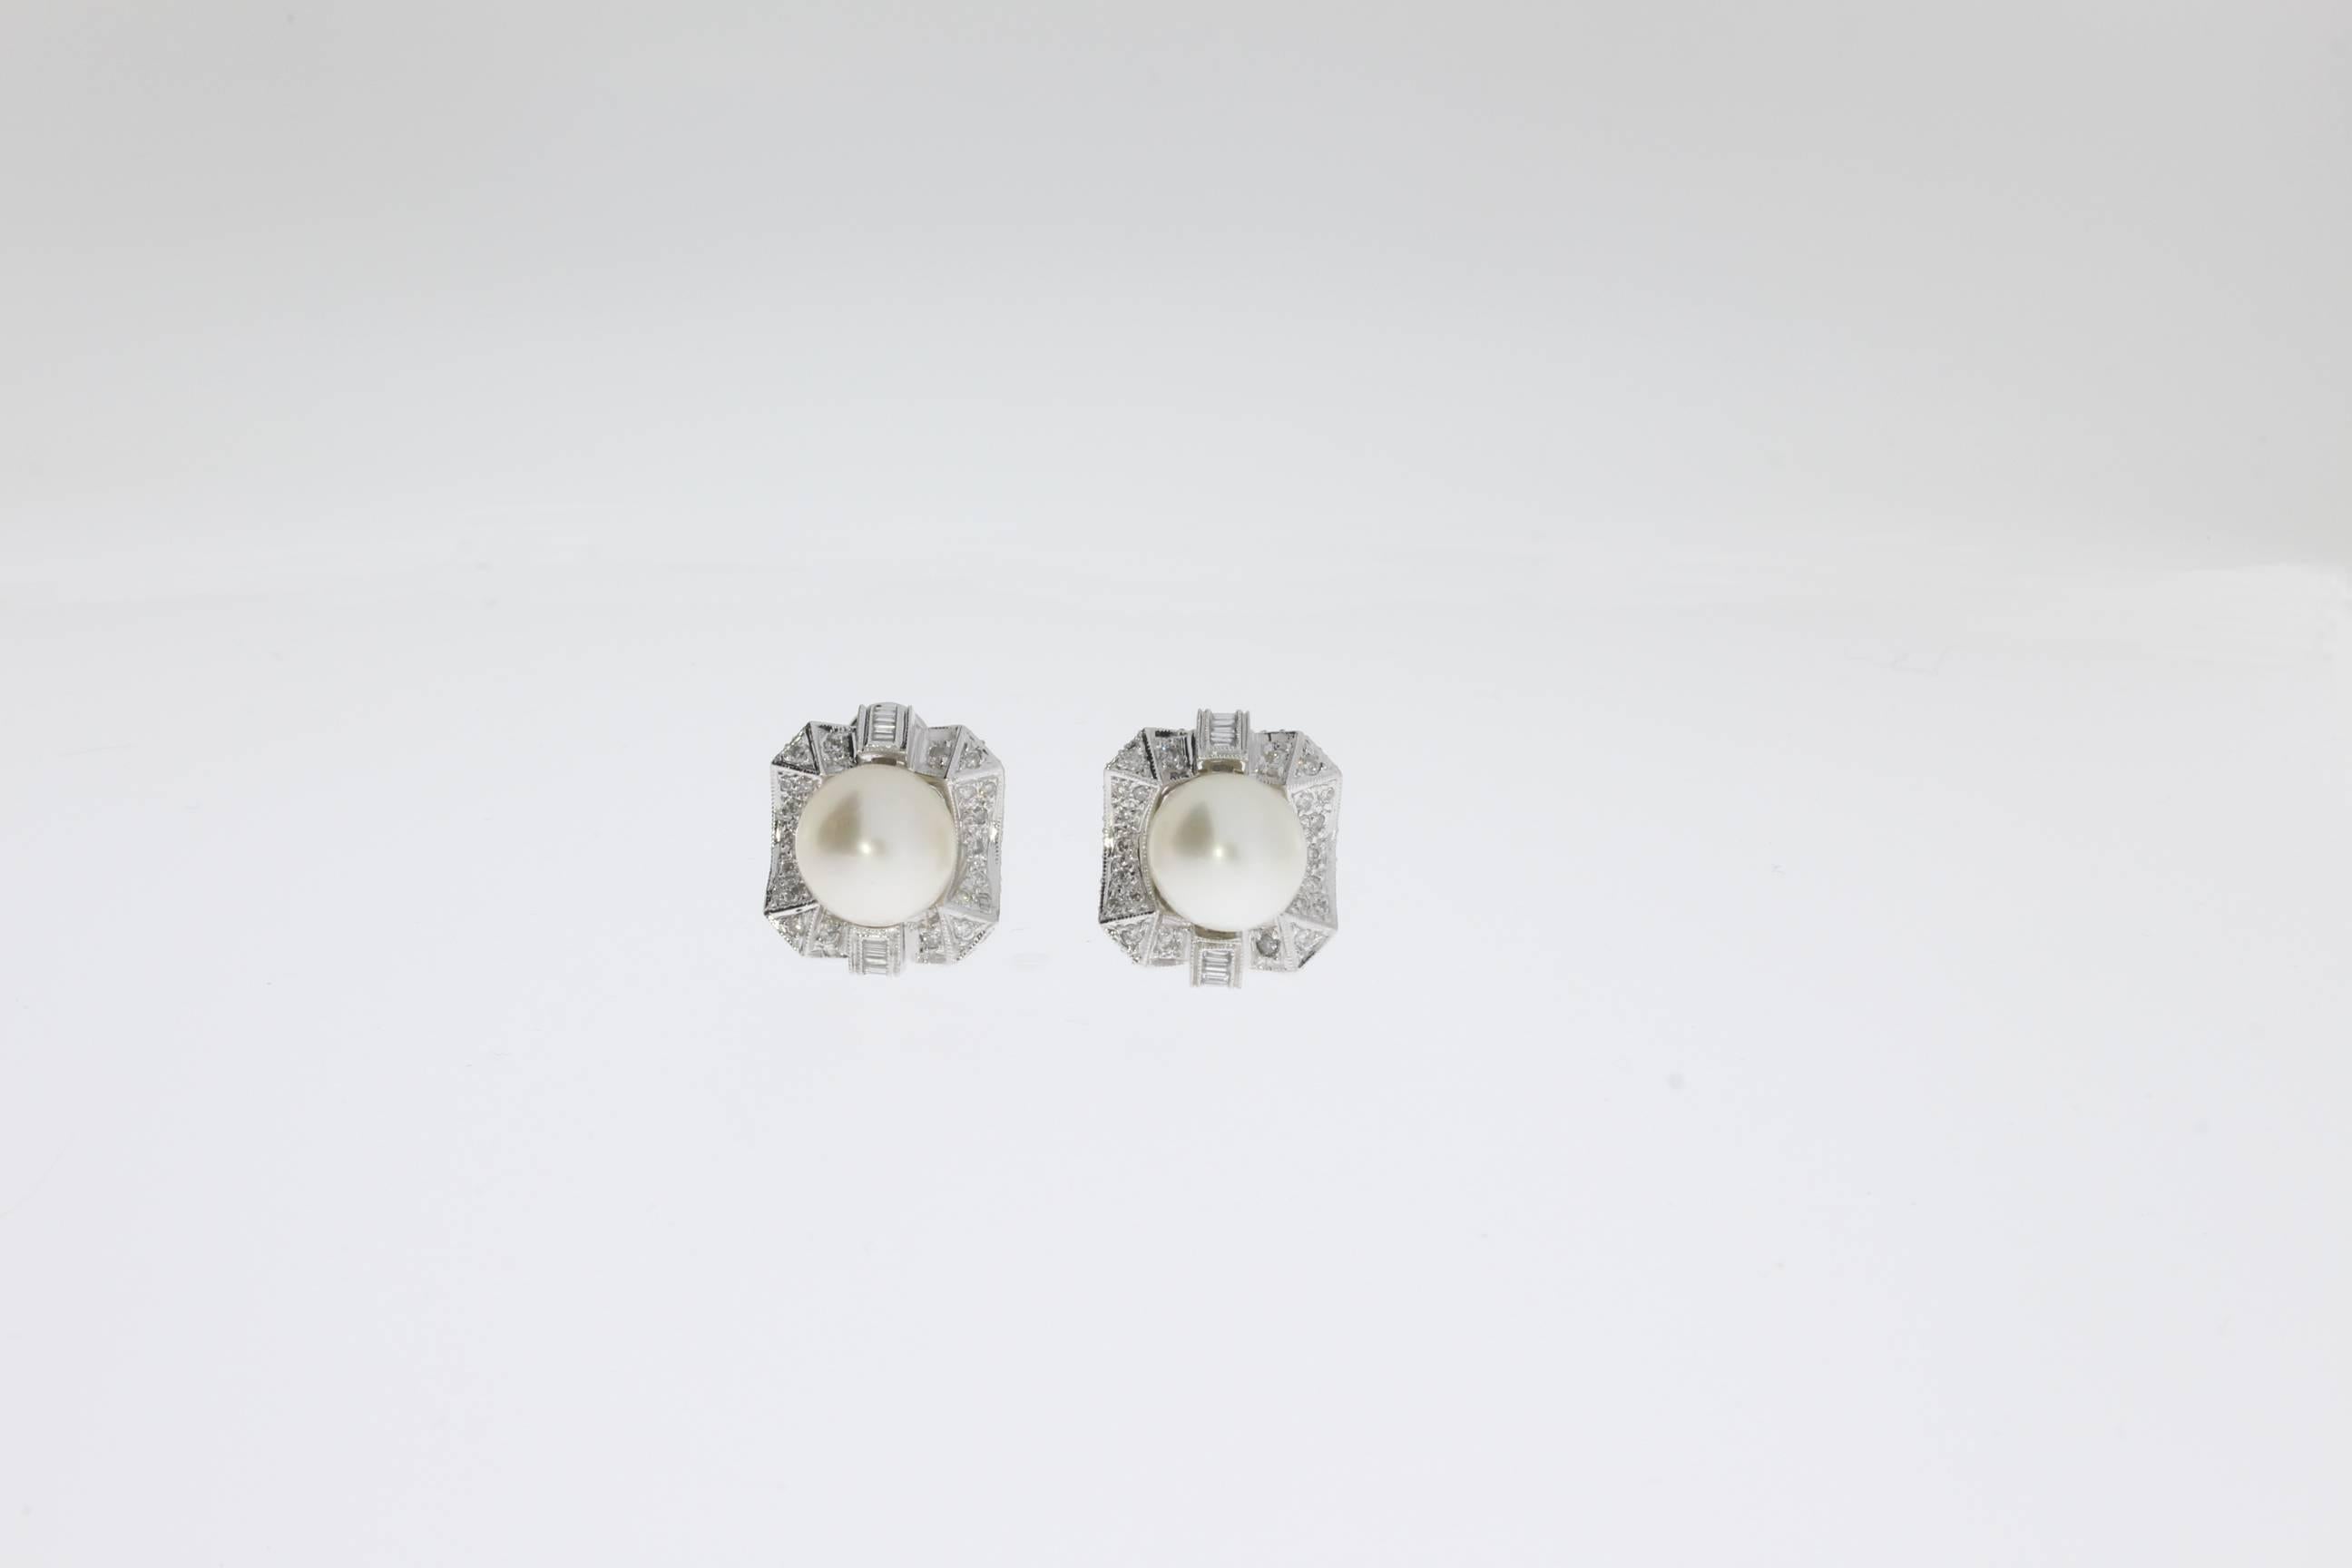 At the centre South Sea pearls measuring 10,43 and 10,58 mm in diameter. Framed by 24 baguette-cut and 104 brilliant-cut diamonds weighing circa 2,12cts. Mounted in 14K white gold. On the back side hallmarked: IX and the purity 14K 585. Total